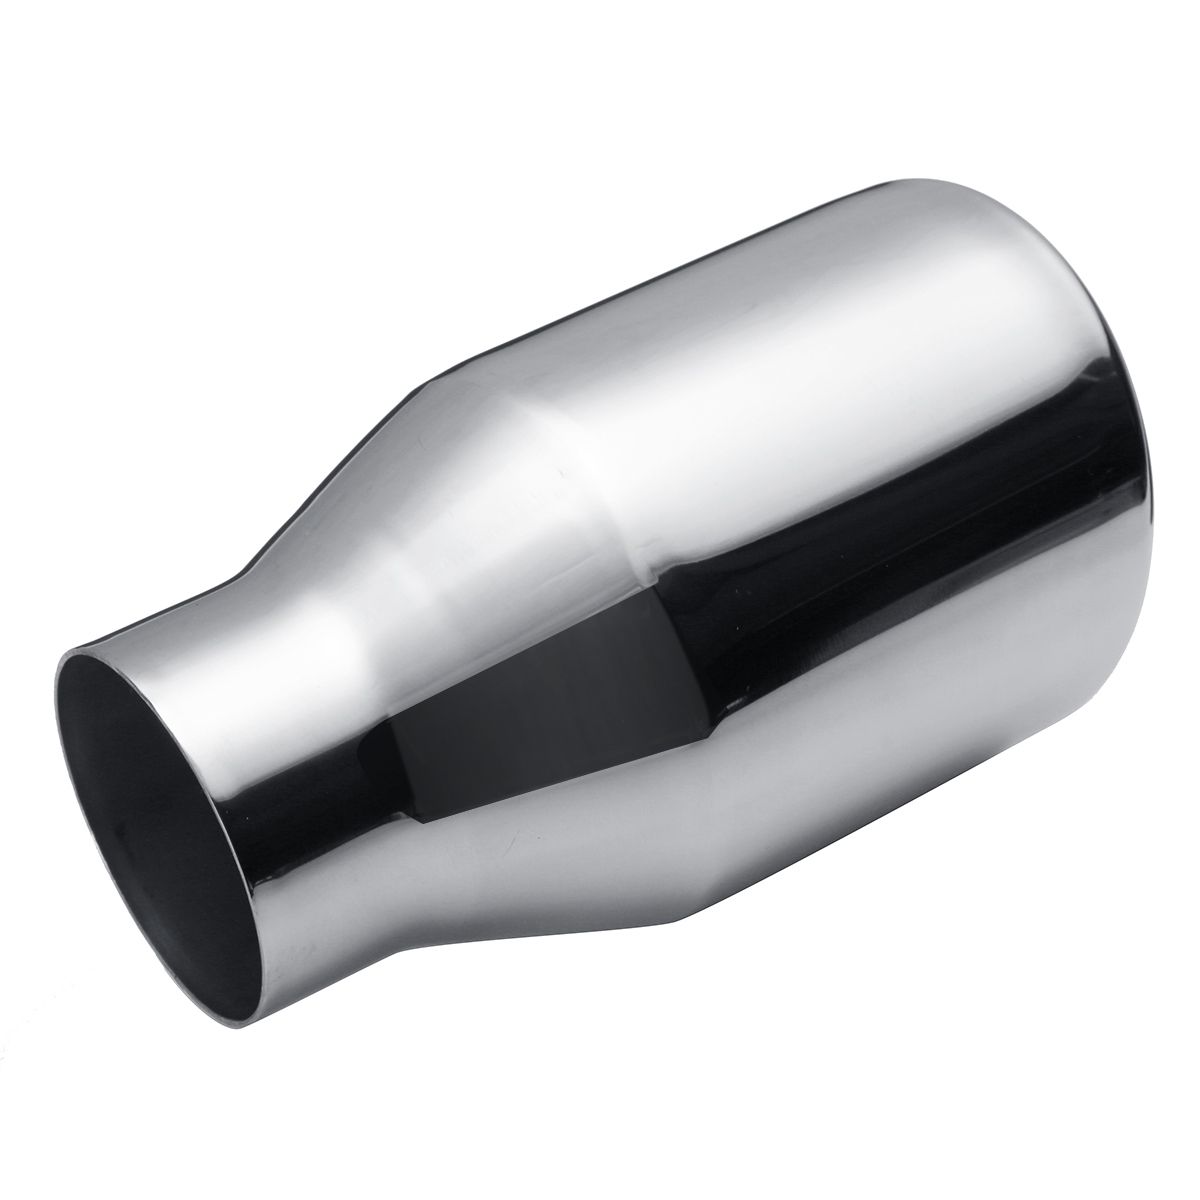 63mm-102mm-Chrome-Stainless-Steel-Car-Round-Rear-Pipe-Tail-Exhaust-Muffler-Tip-1443566